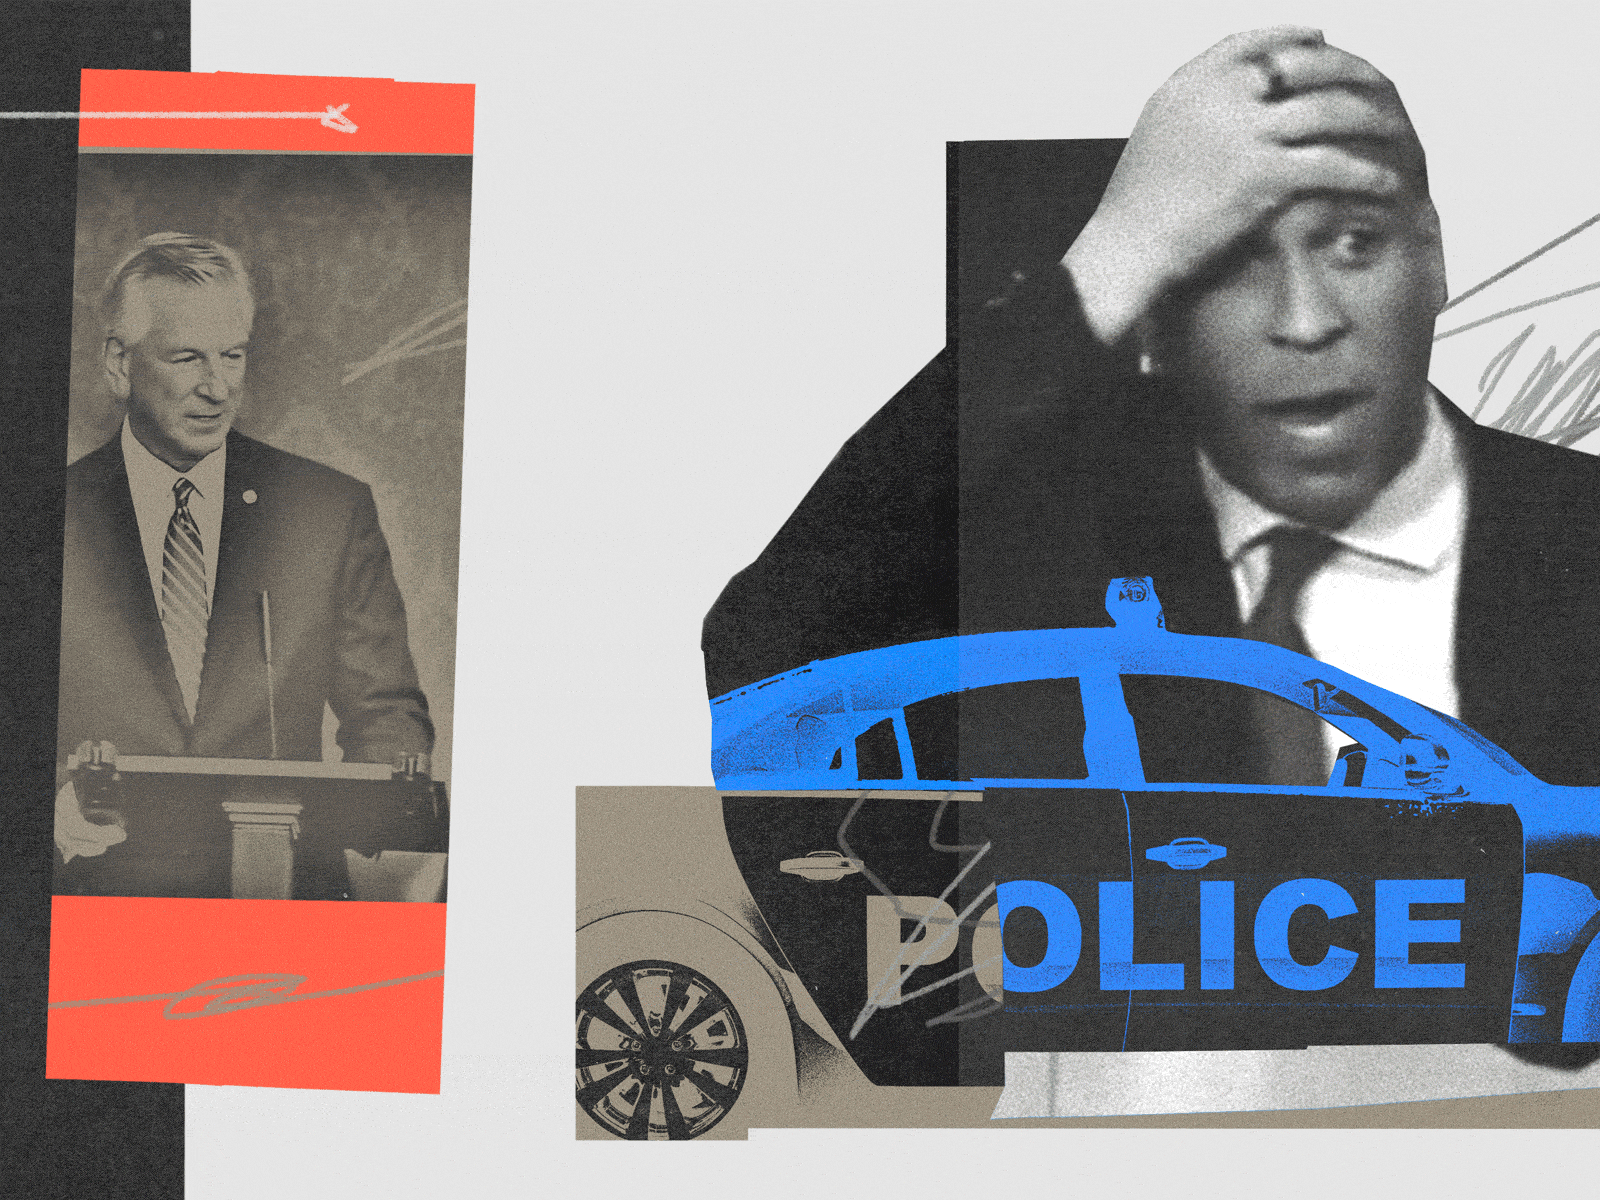 Cory Booker Outfoxed Republicans on ‘Defund the Police.’ Now What?